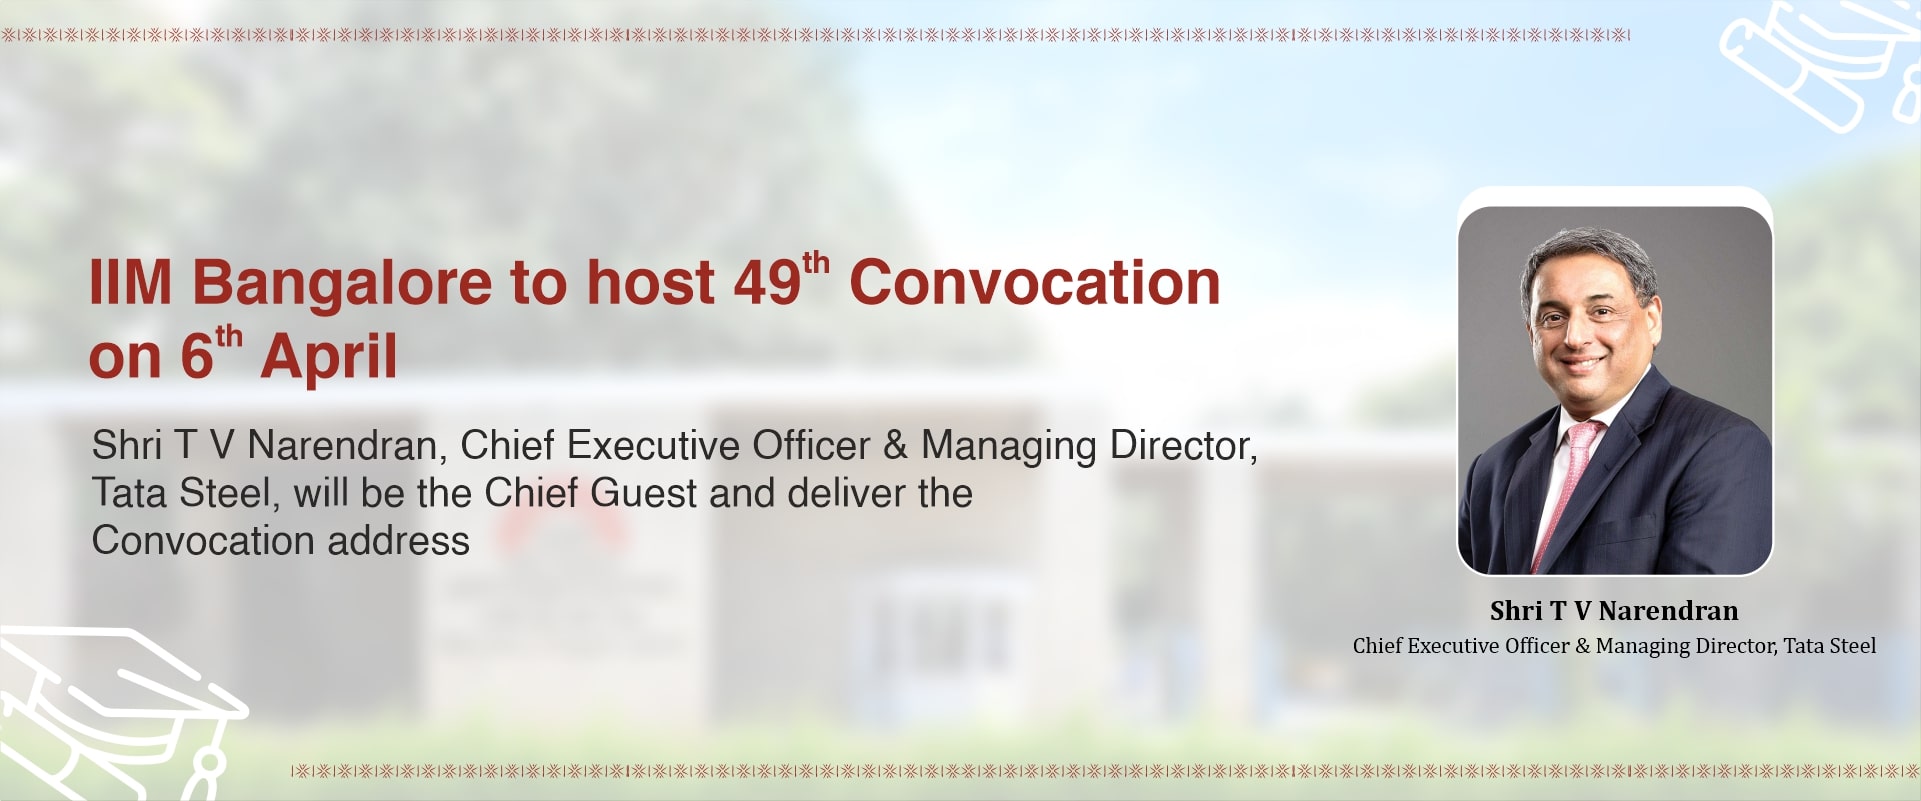  IIM Bangalore to host 49th Convocation on 6th April 